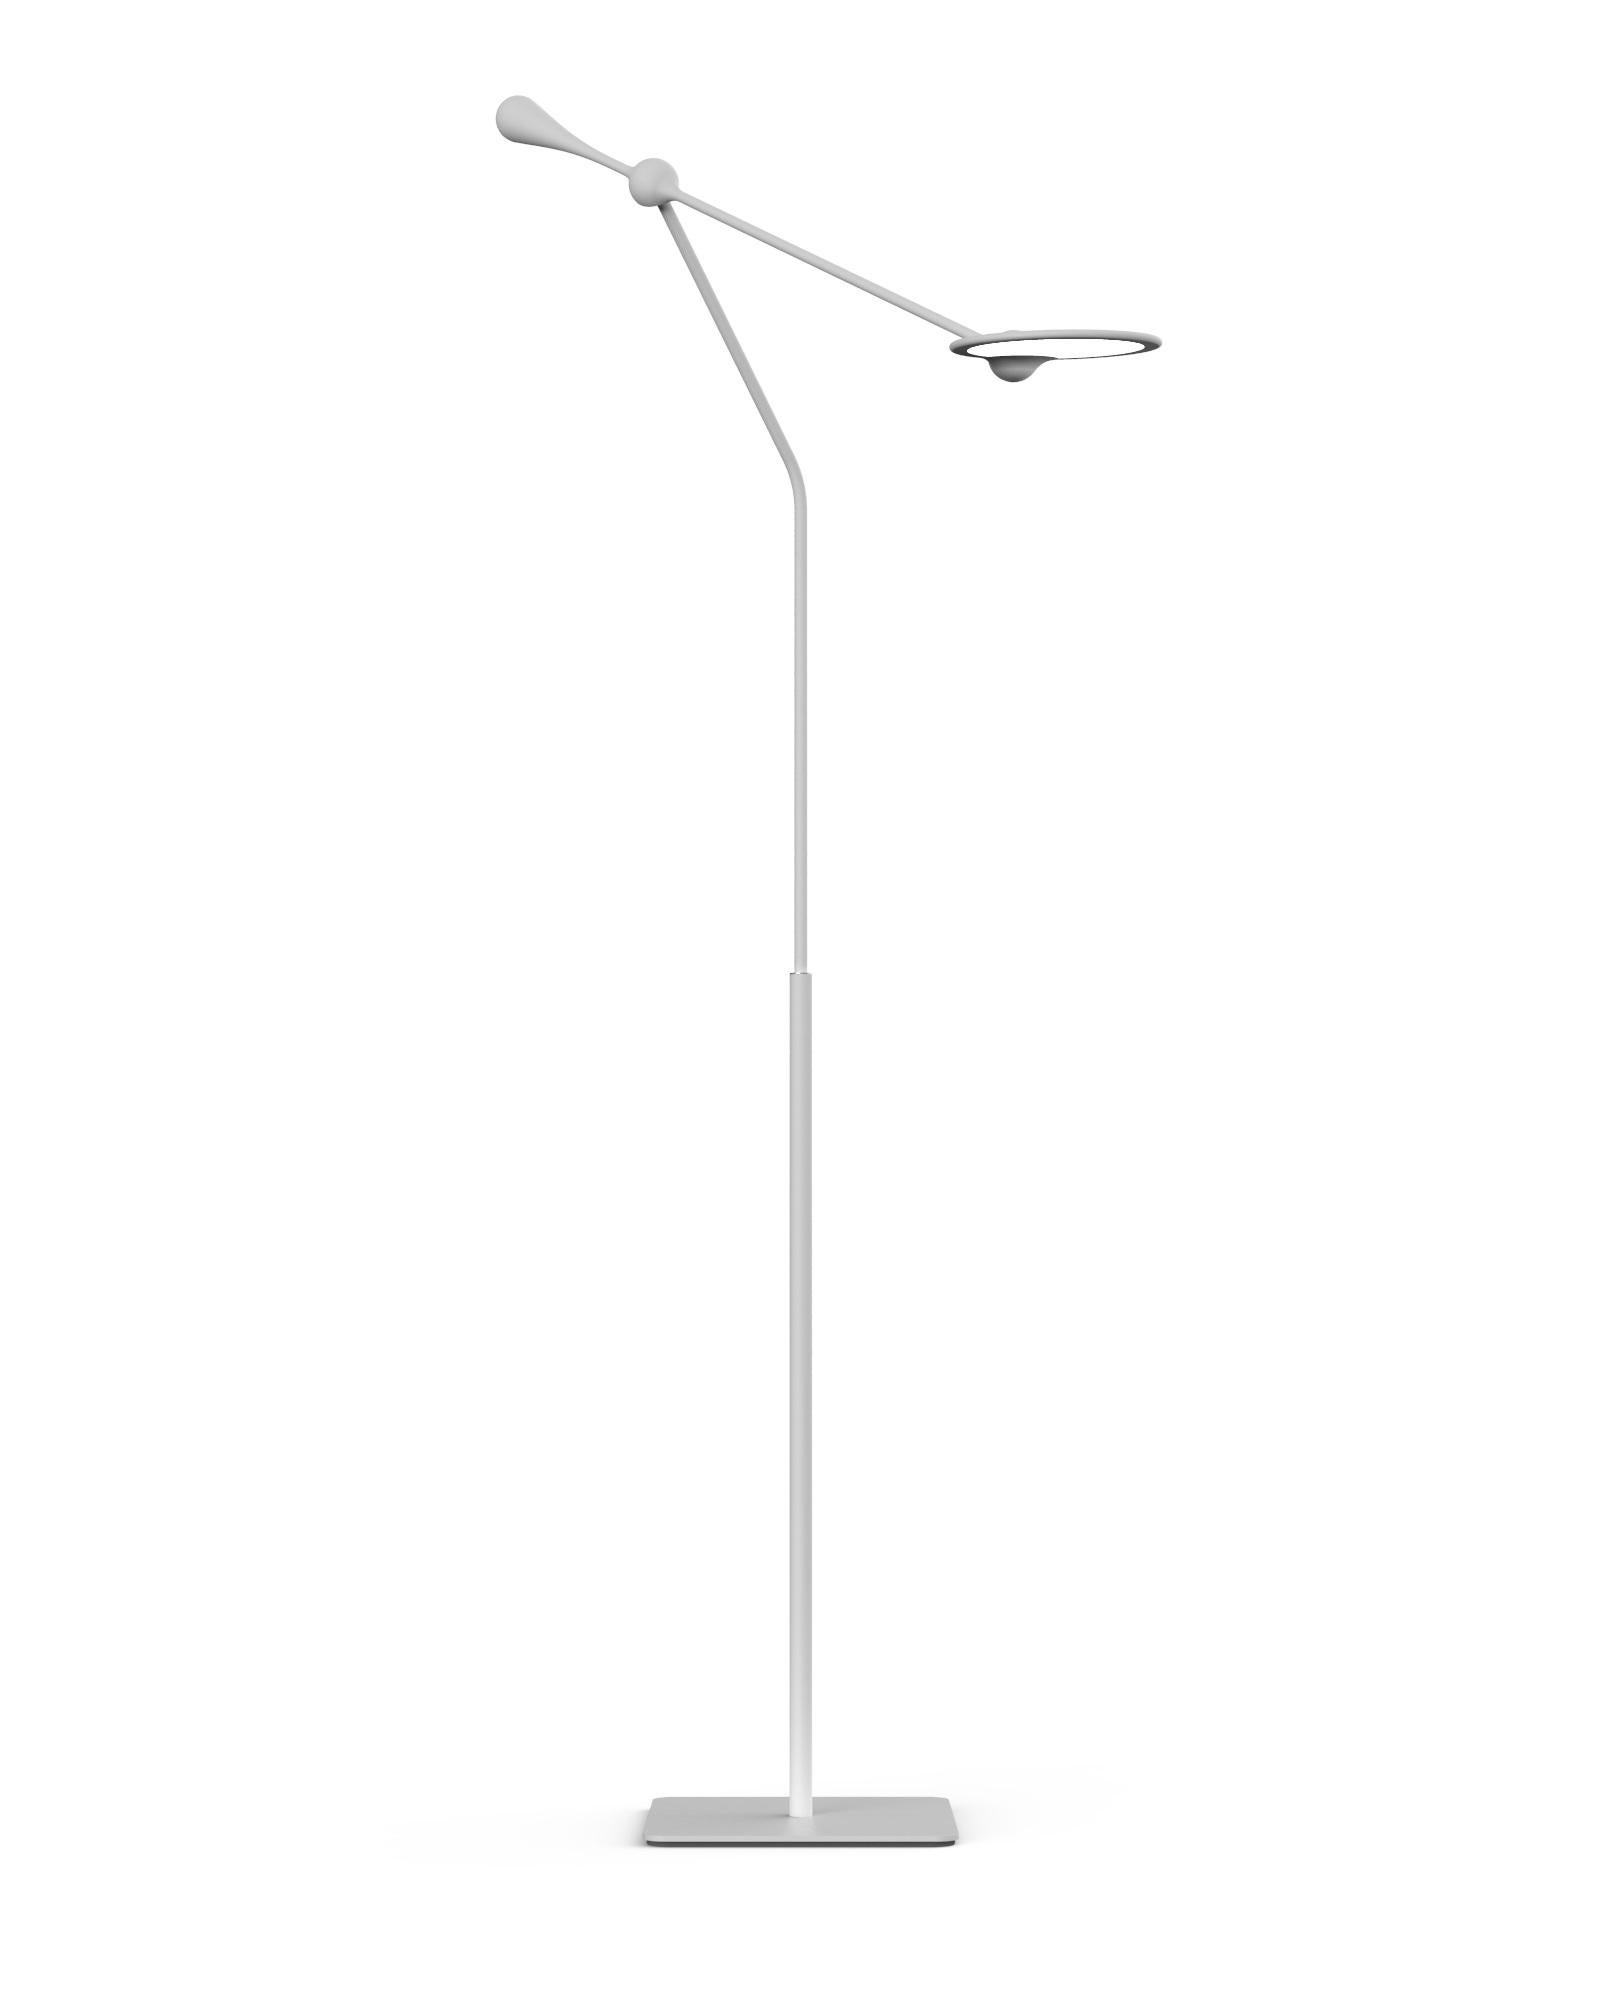 8” square base, ?light panel 6.2” Ø, ?6’ black cord

Aluminum, iron and steel structure, dimmable 102 LED array, 18-380 lumens

Peter Stathis, LED light designer based in San Francisco envisioned the Trapeze lamp as an ultra-functional, long-lasting